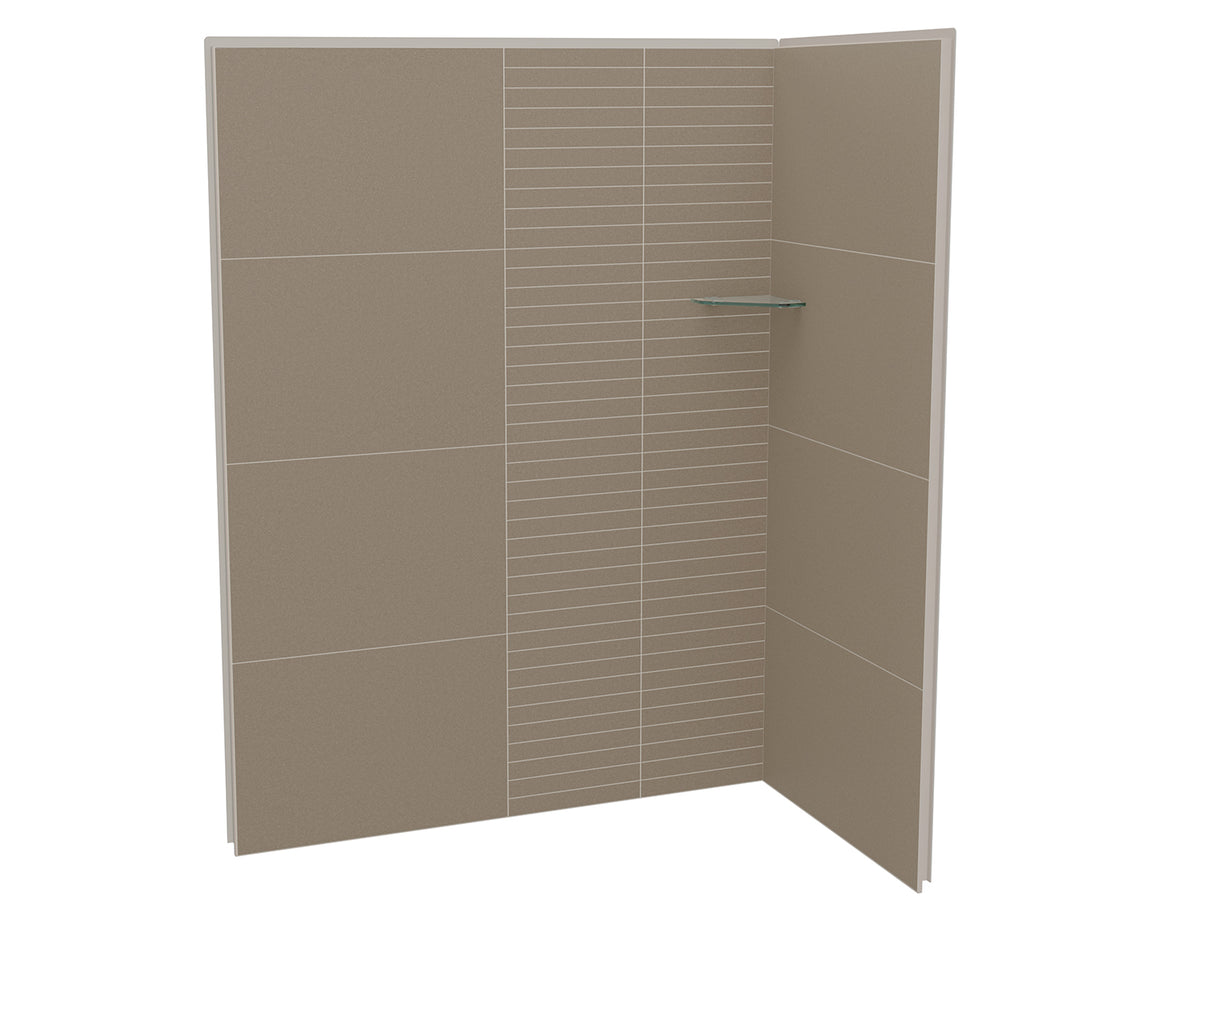 MAAX 107465-306-512 Utile 6032 Composite Direct-to-Stud Two-Piece Corner Shower Wall Kit in Erosion Taupe